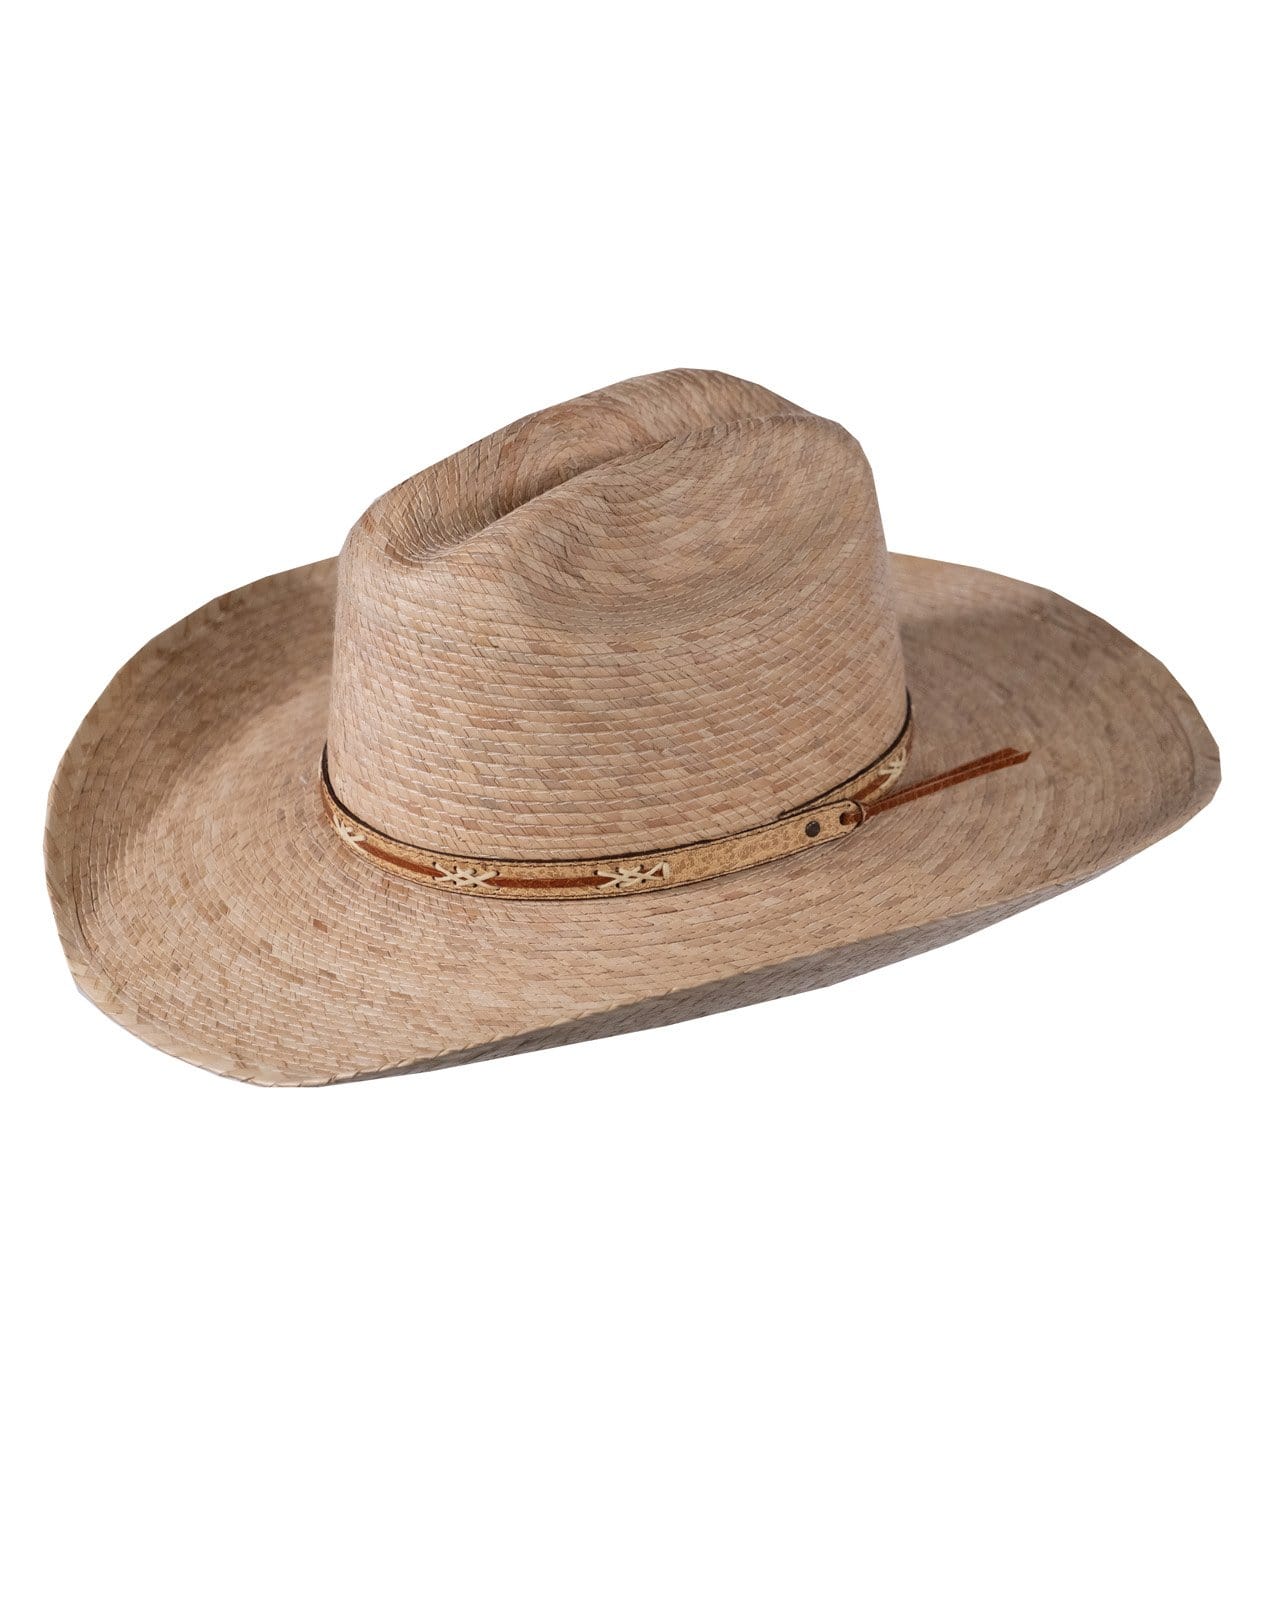 Lone Tree | Hats by Outback Trading Company | OutbackTrading.com